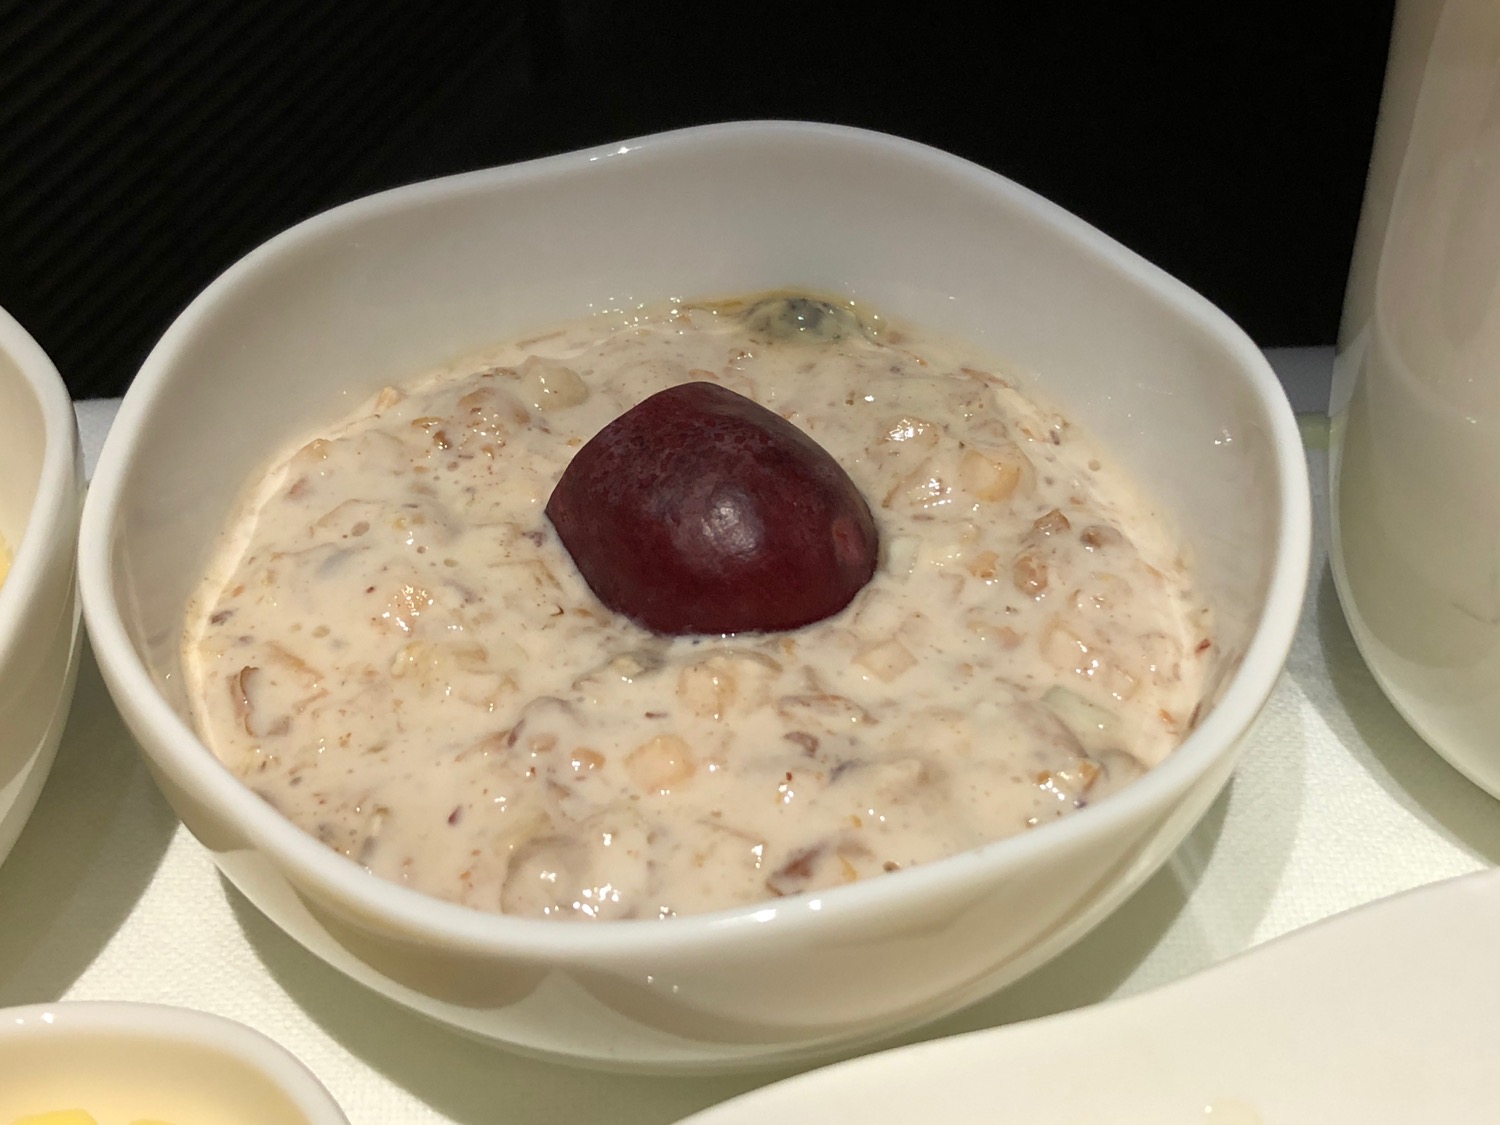 a bowl of oatmeal with a fruit in it